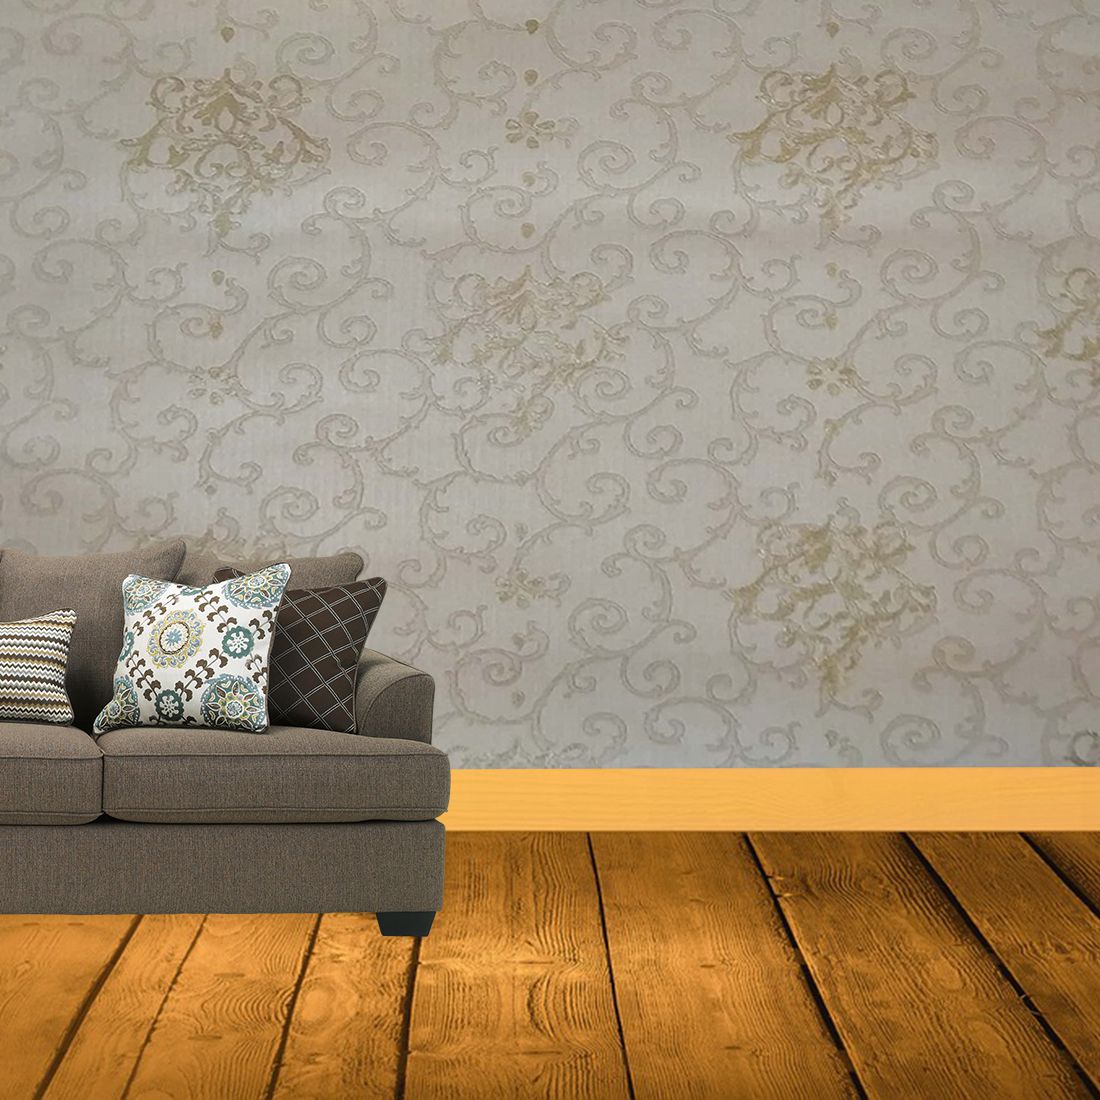 Wallpaper 4 Less Beige Ornamental Italian WallPaper Buy Wallpaper 4 Less  Beige Ornamental Italian WallPaper at Best Price in India on Snapdeal